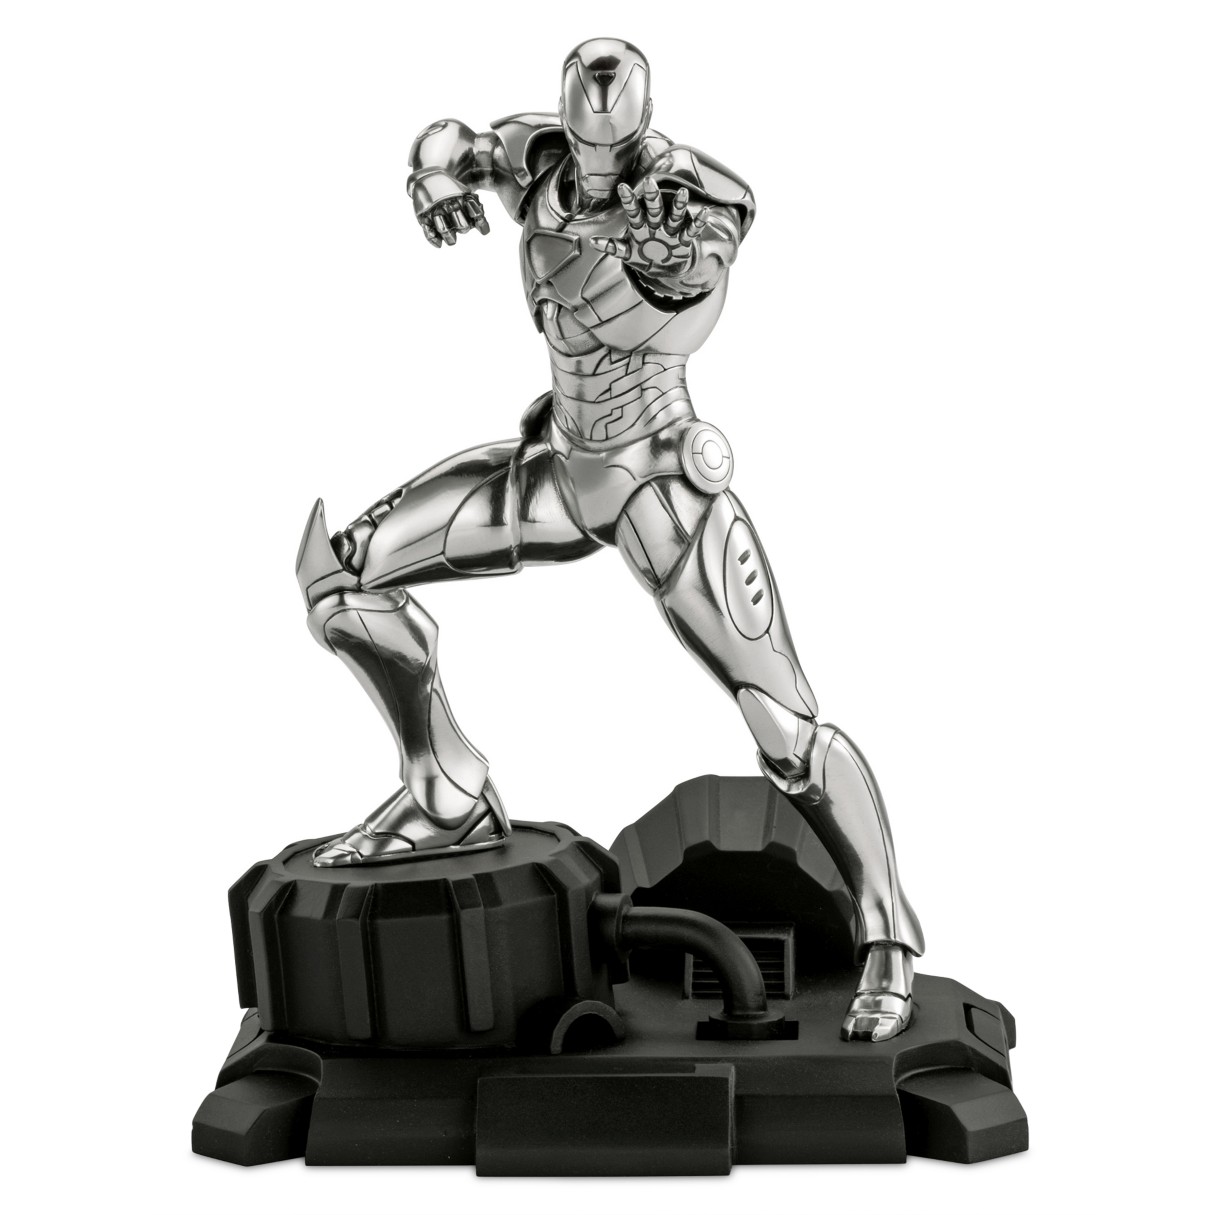 Iron Man Pewter Figurine by Royal Selangor – Limited Edition